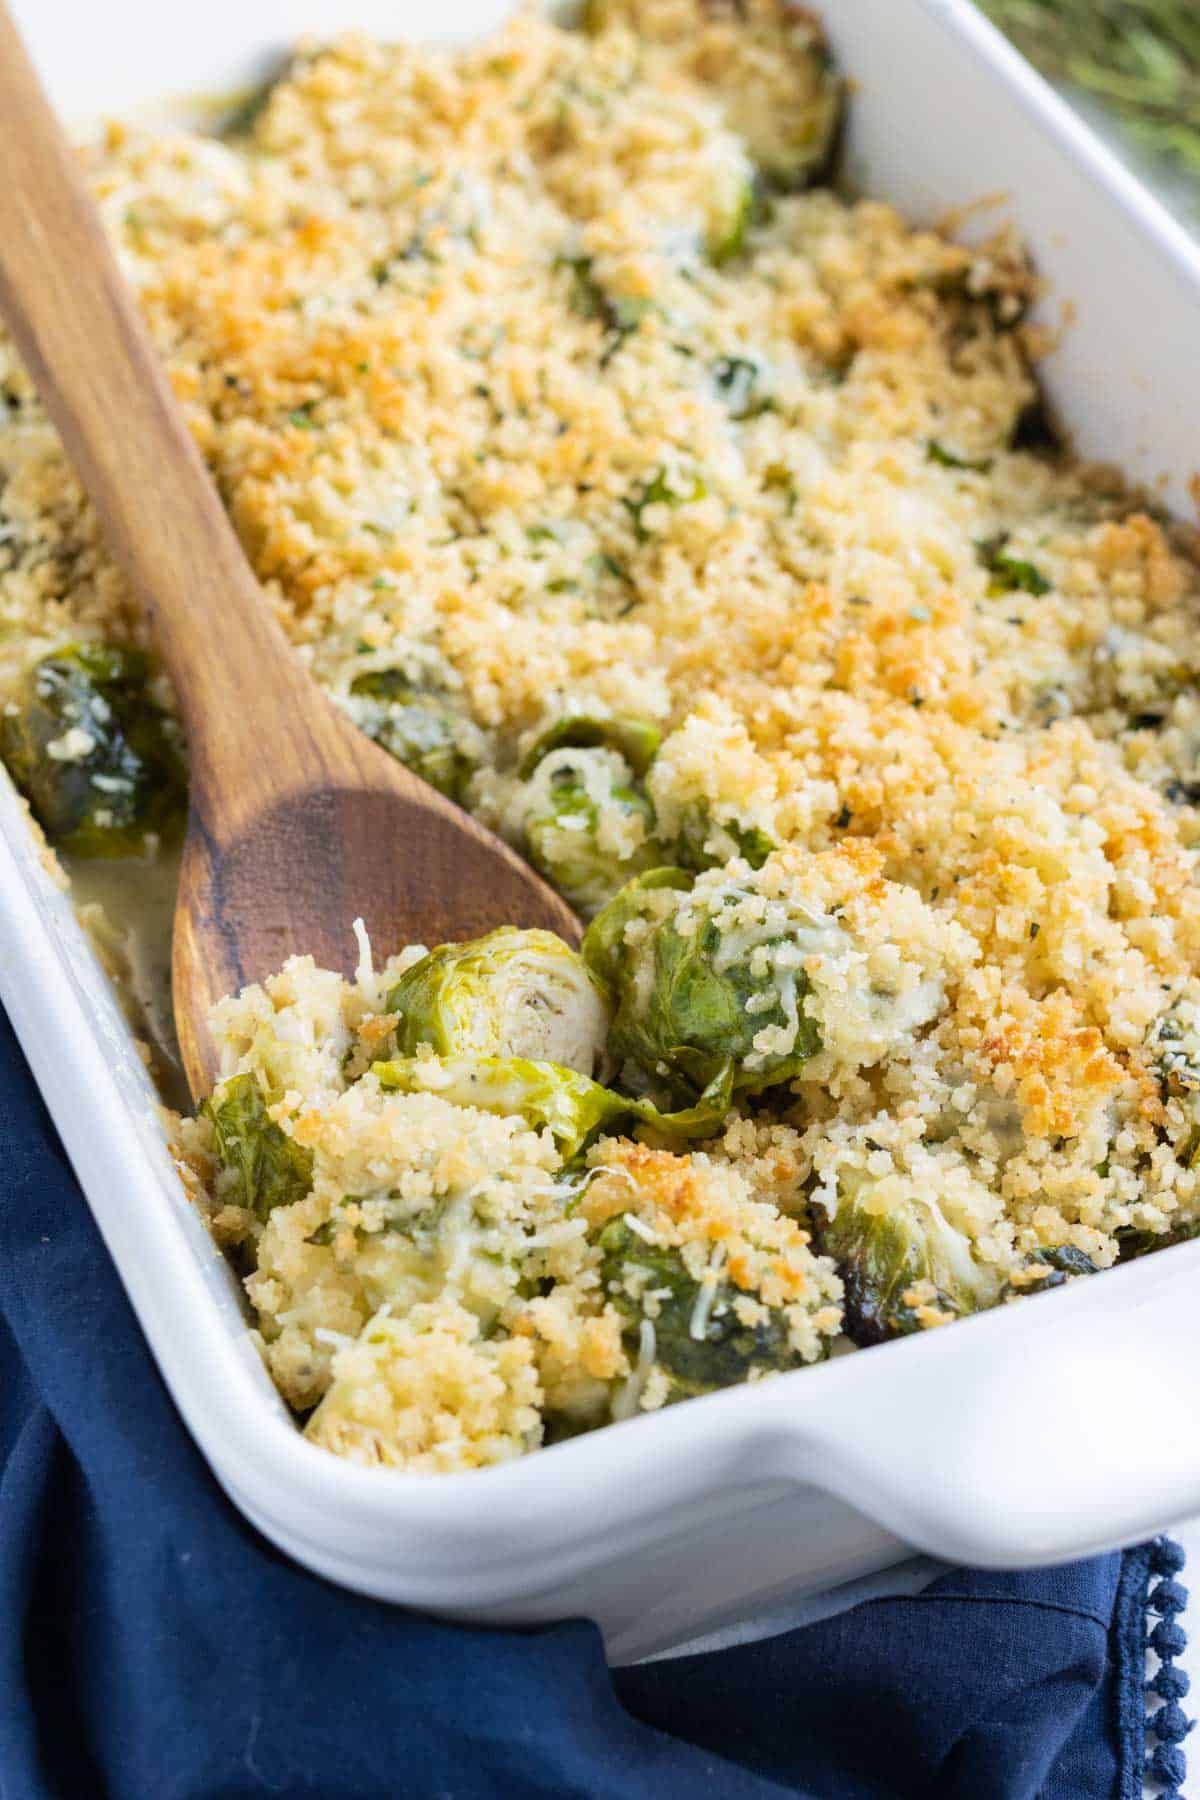 Brussels Sprouts au Gratin is a healthy, holiday side dish.